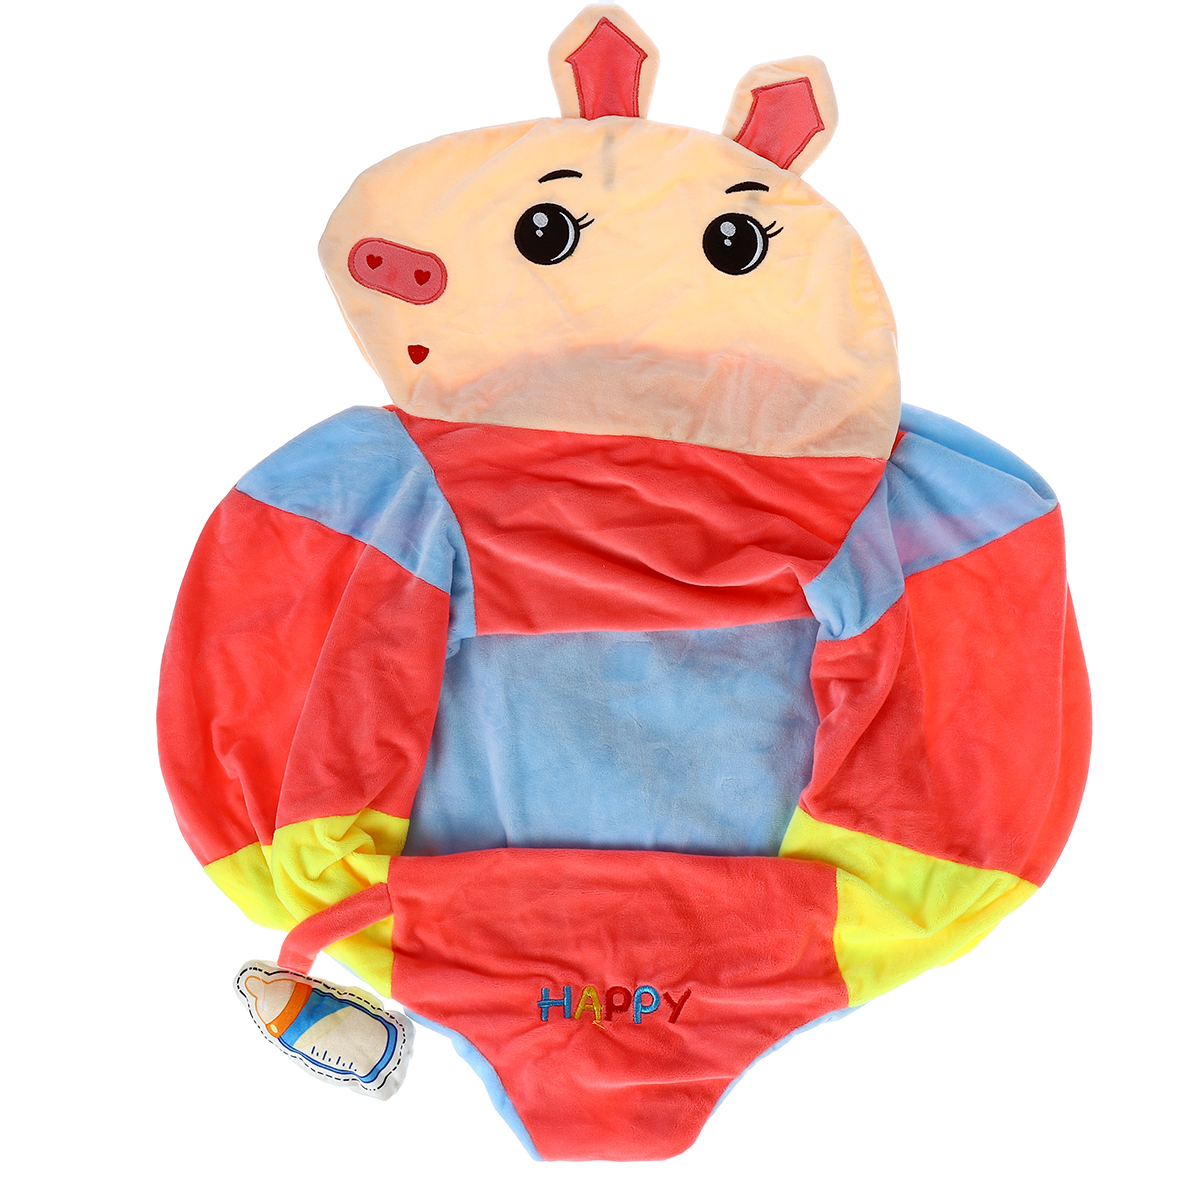 Multi-Style-Kids-Baby-Support-Seats-Sit-Up-Soft-Chair-Sofa-Cartoon-Animal-Kids-Learning-To-Sit-Plush-1817560-11